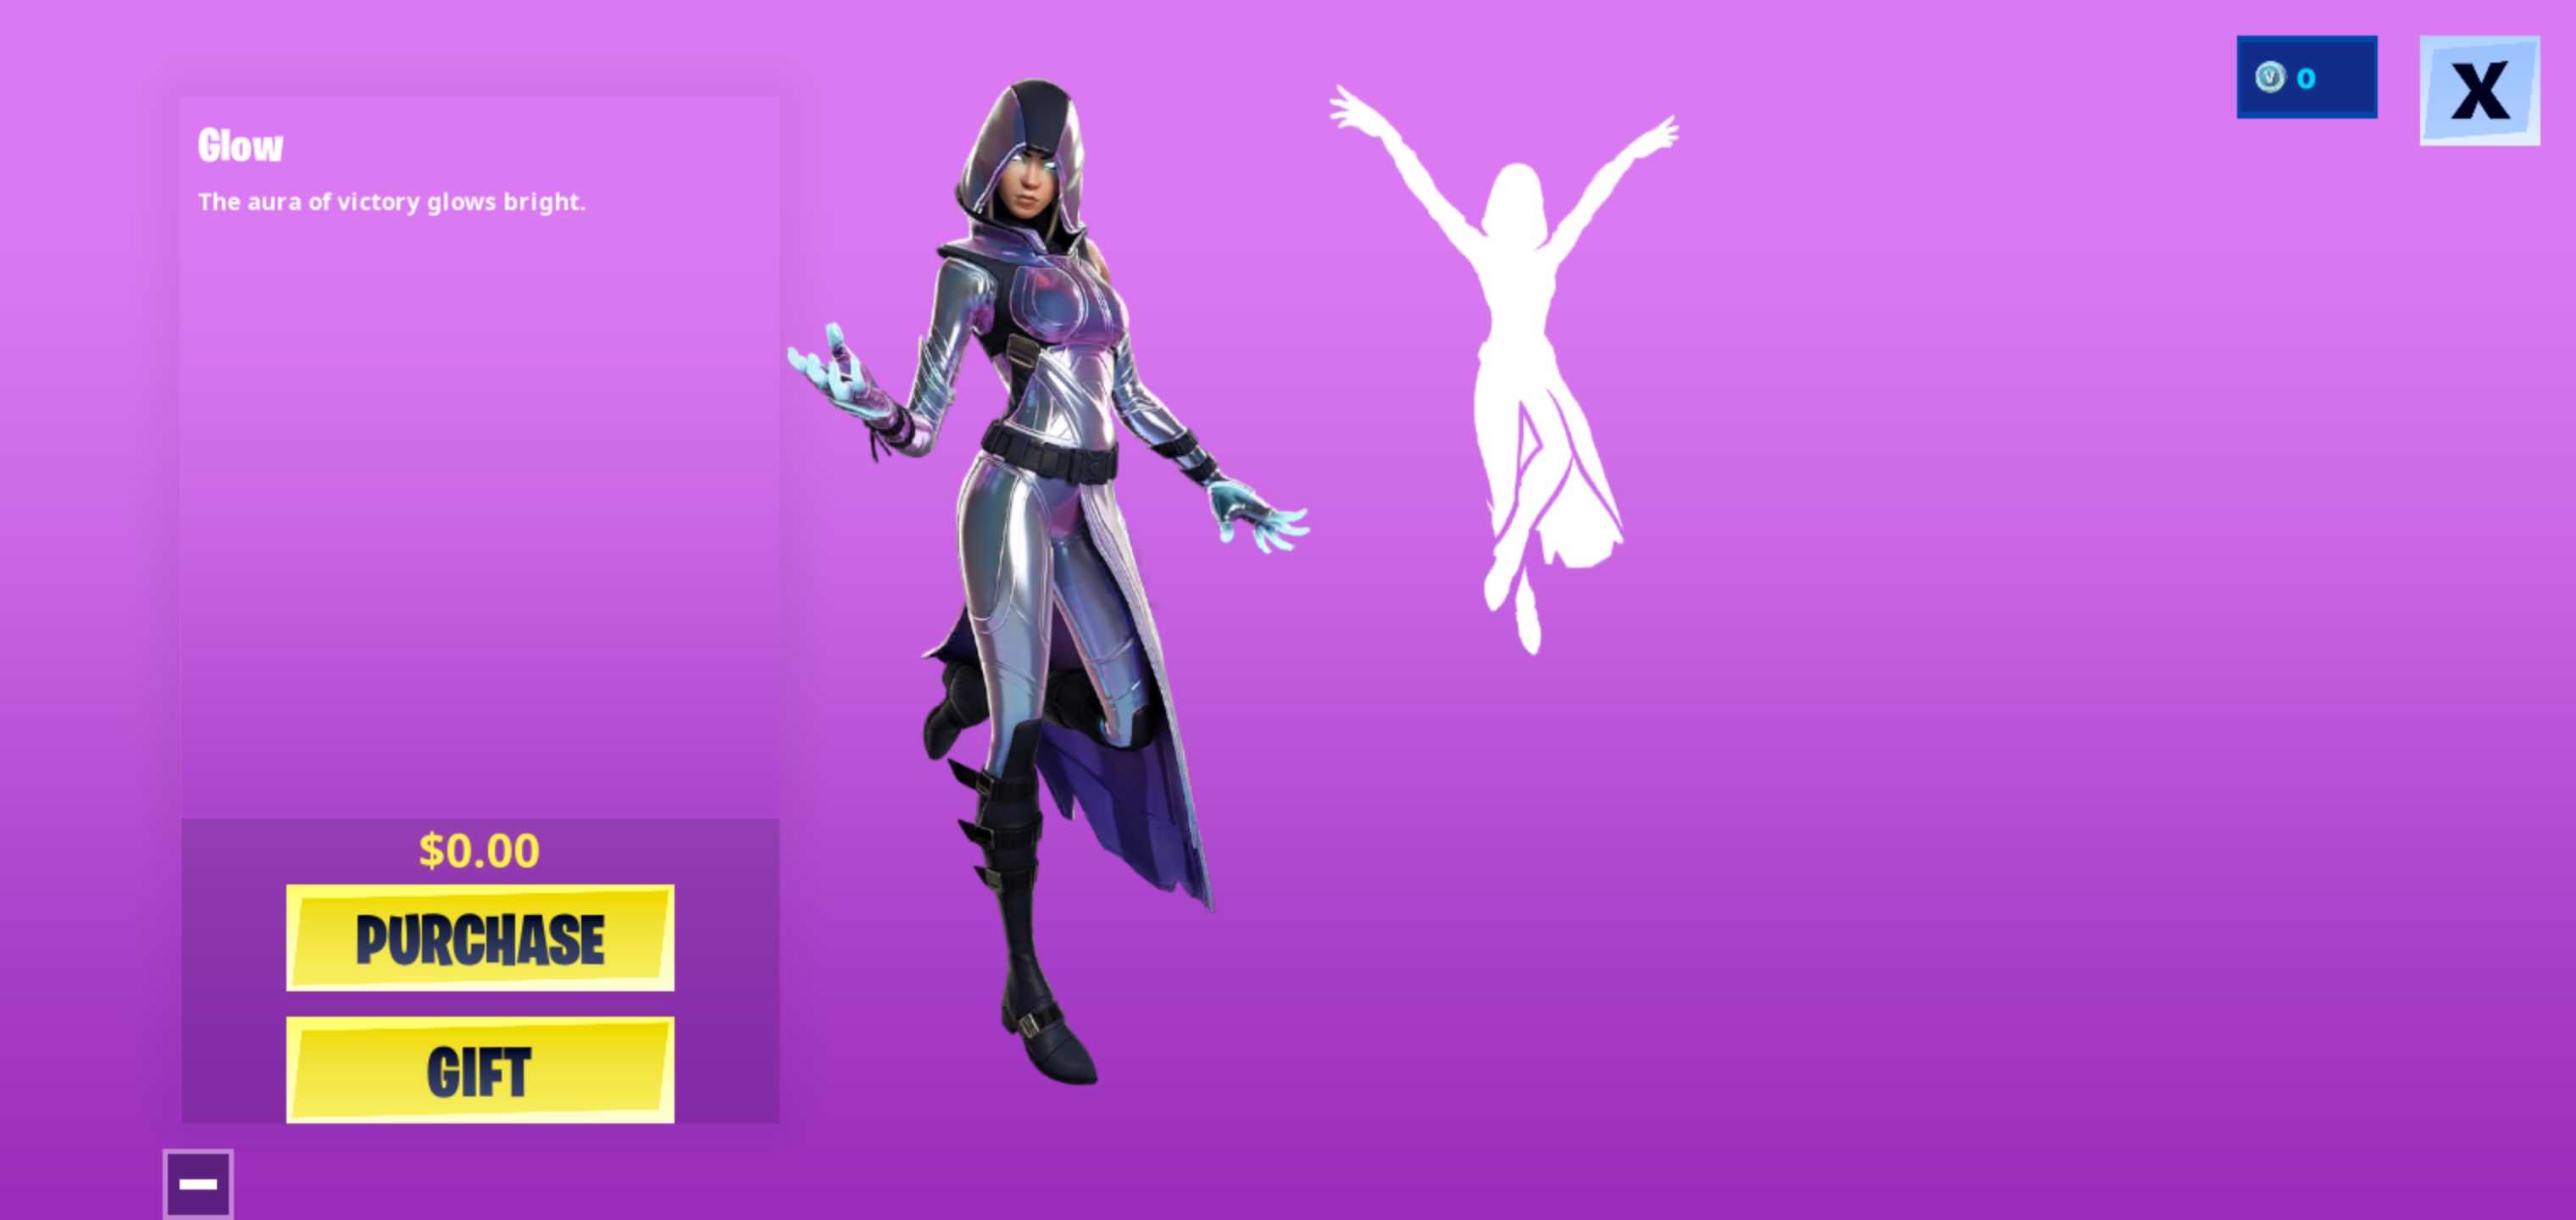 How To Get The Samsung Fortnite Glow Skin For Free Sammobile